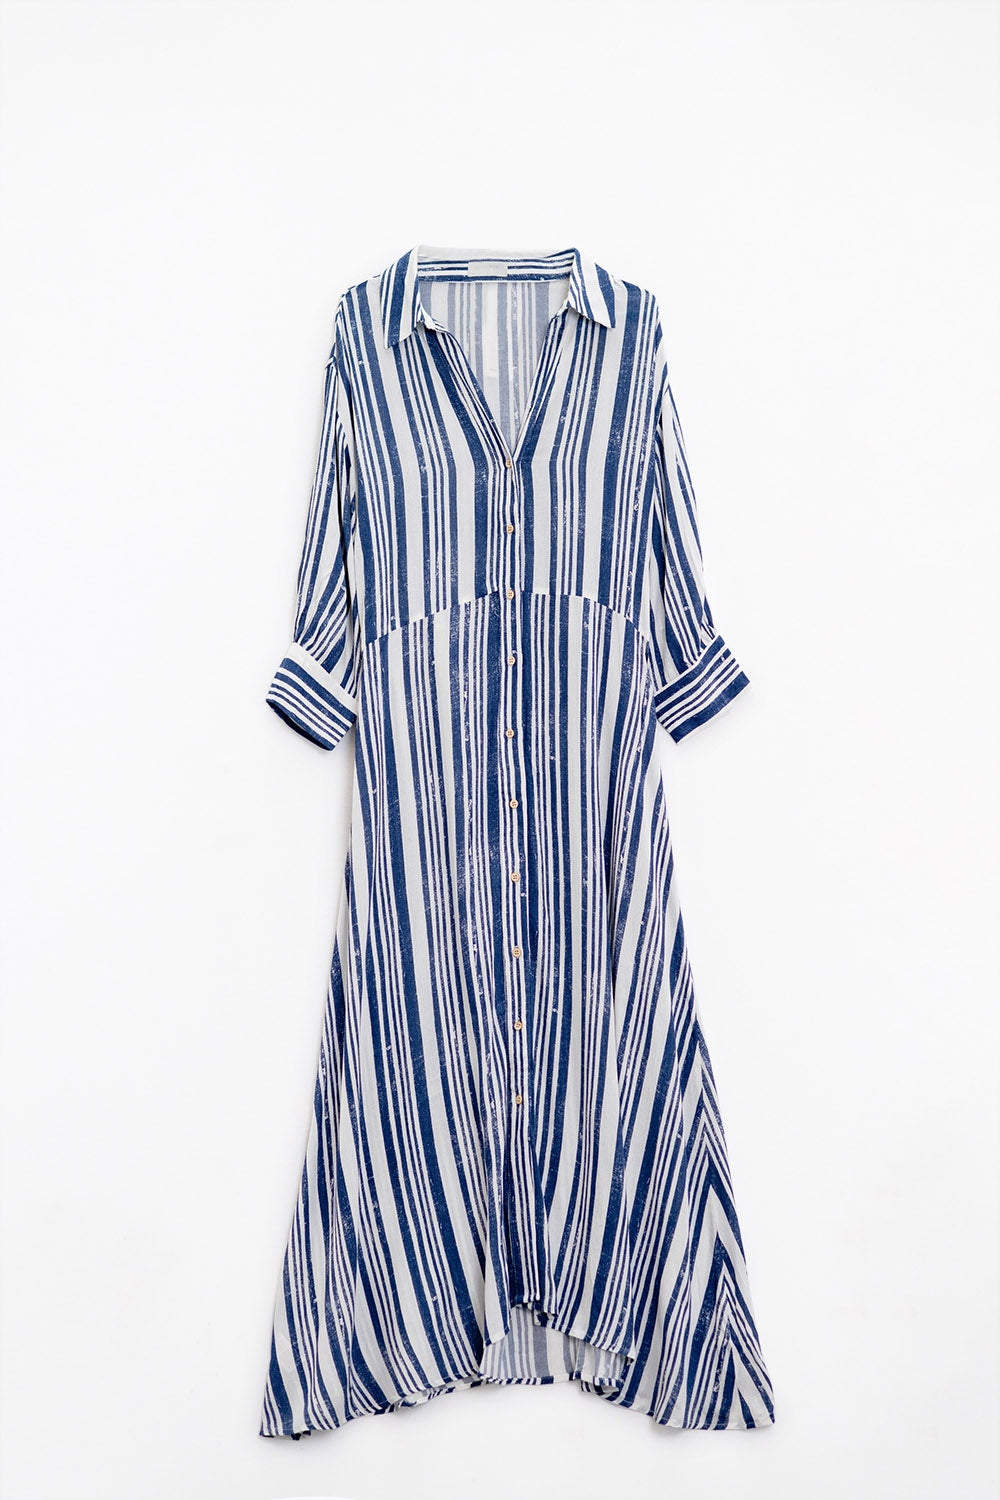 Striped Maxi Shirt Dress With 3/4 Sleeve and Belt in Blue and White